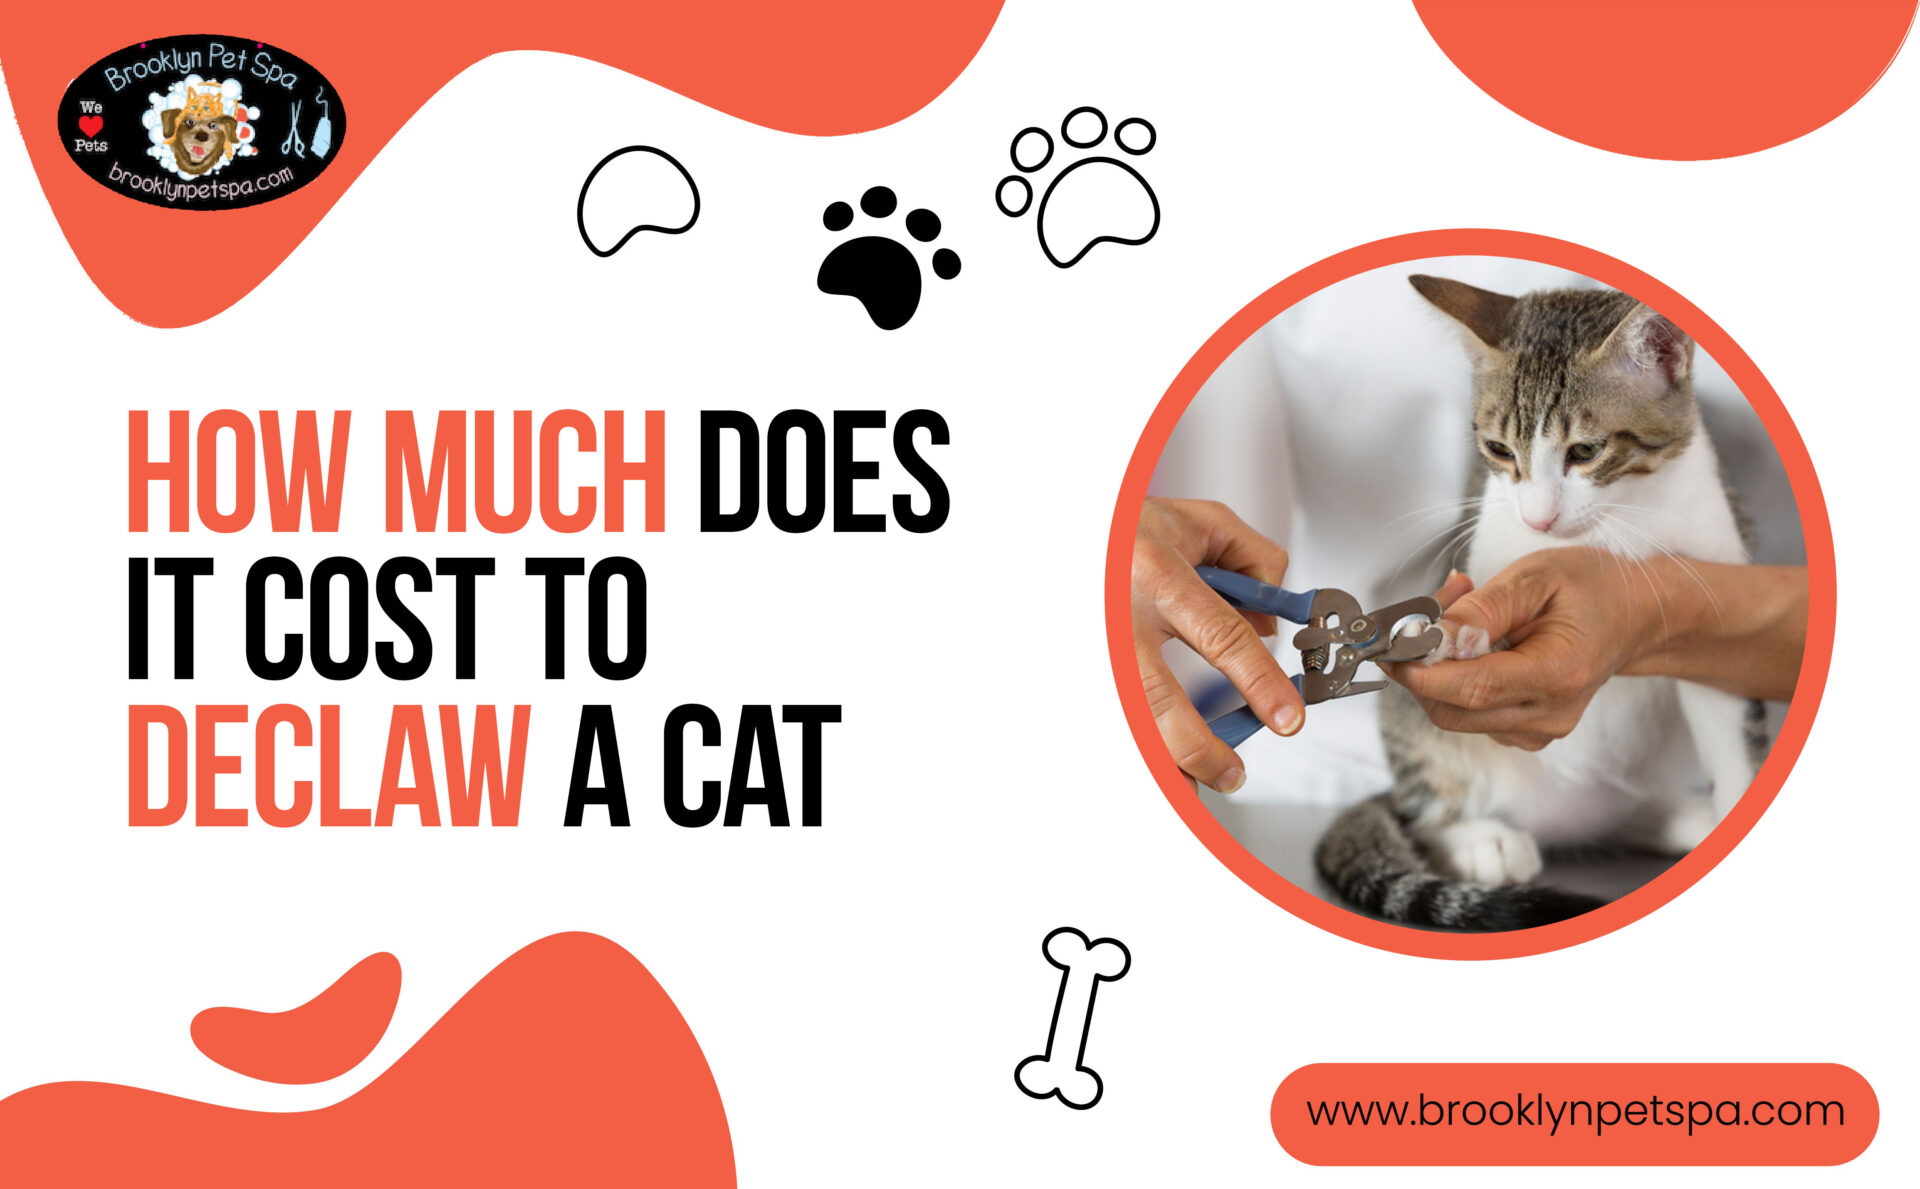 How Much Does it Cost to Declaw a Cat?